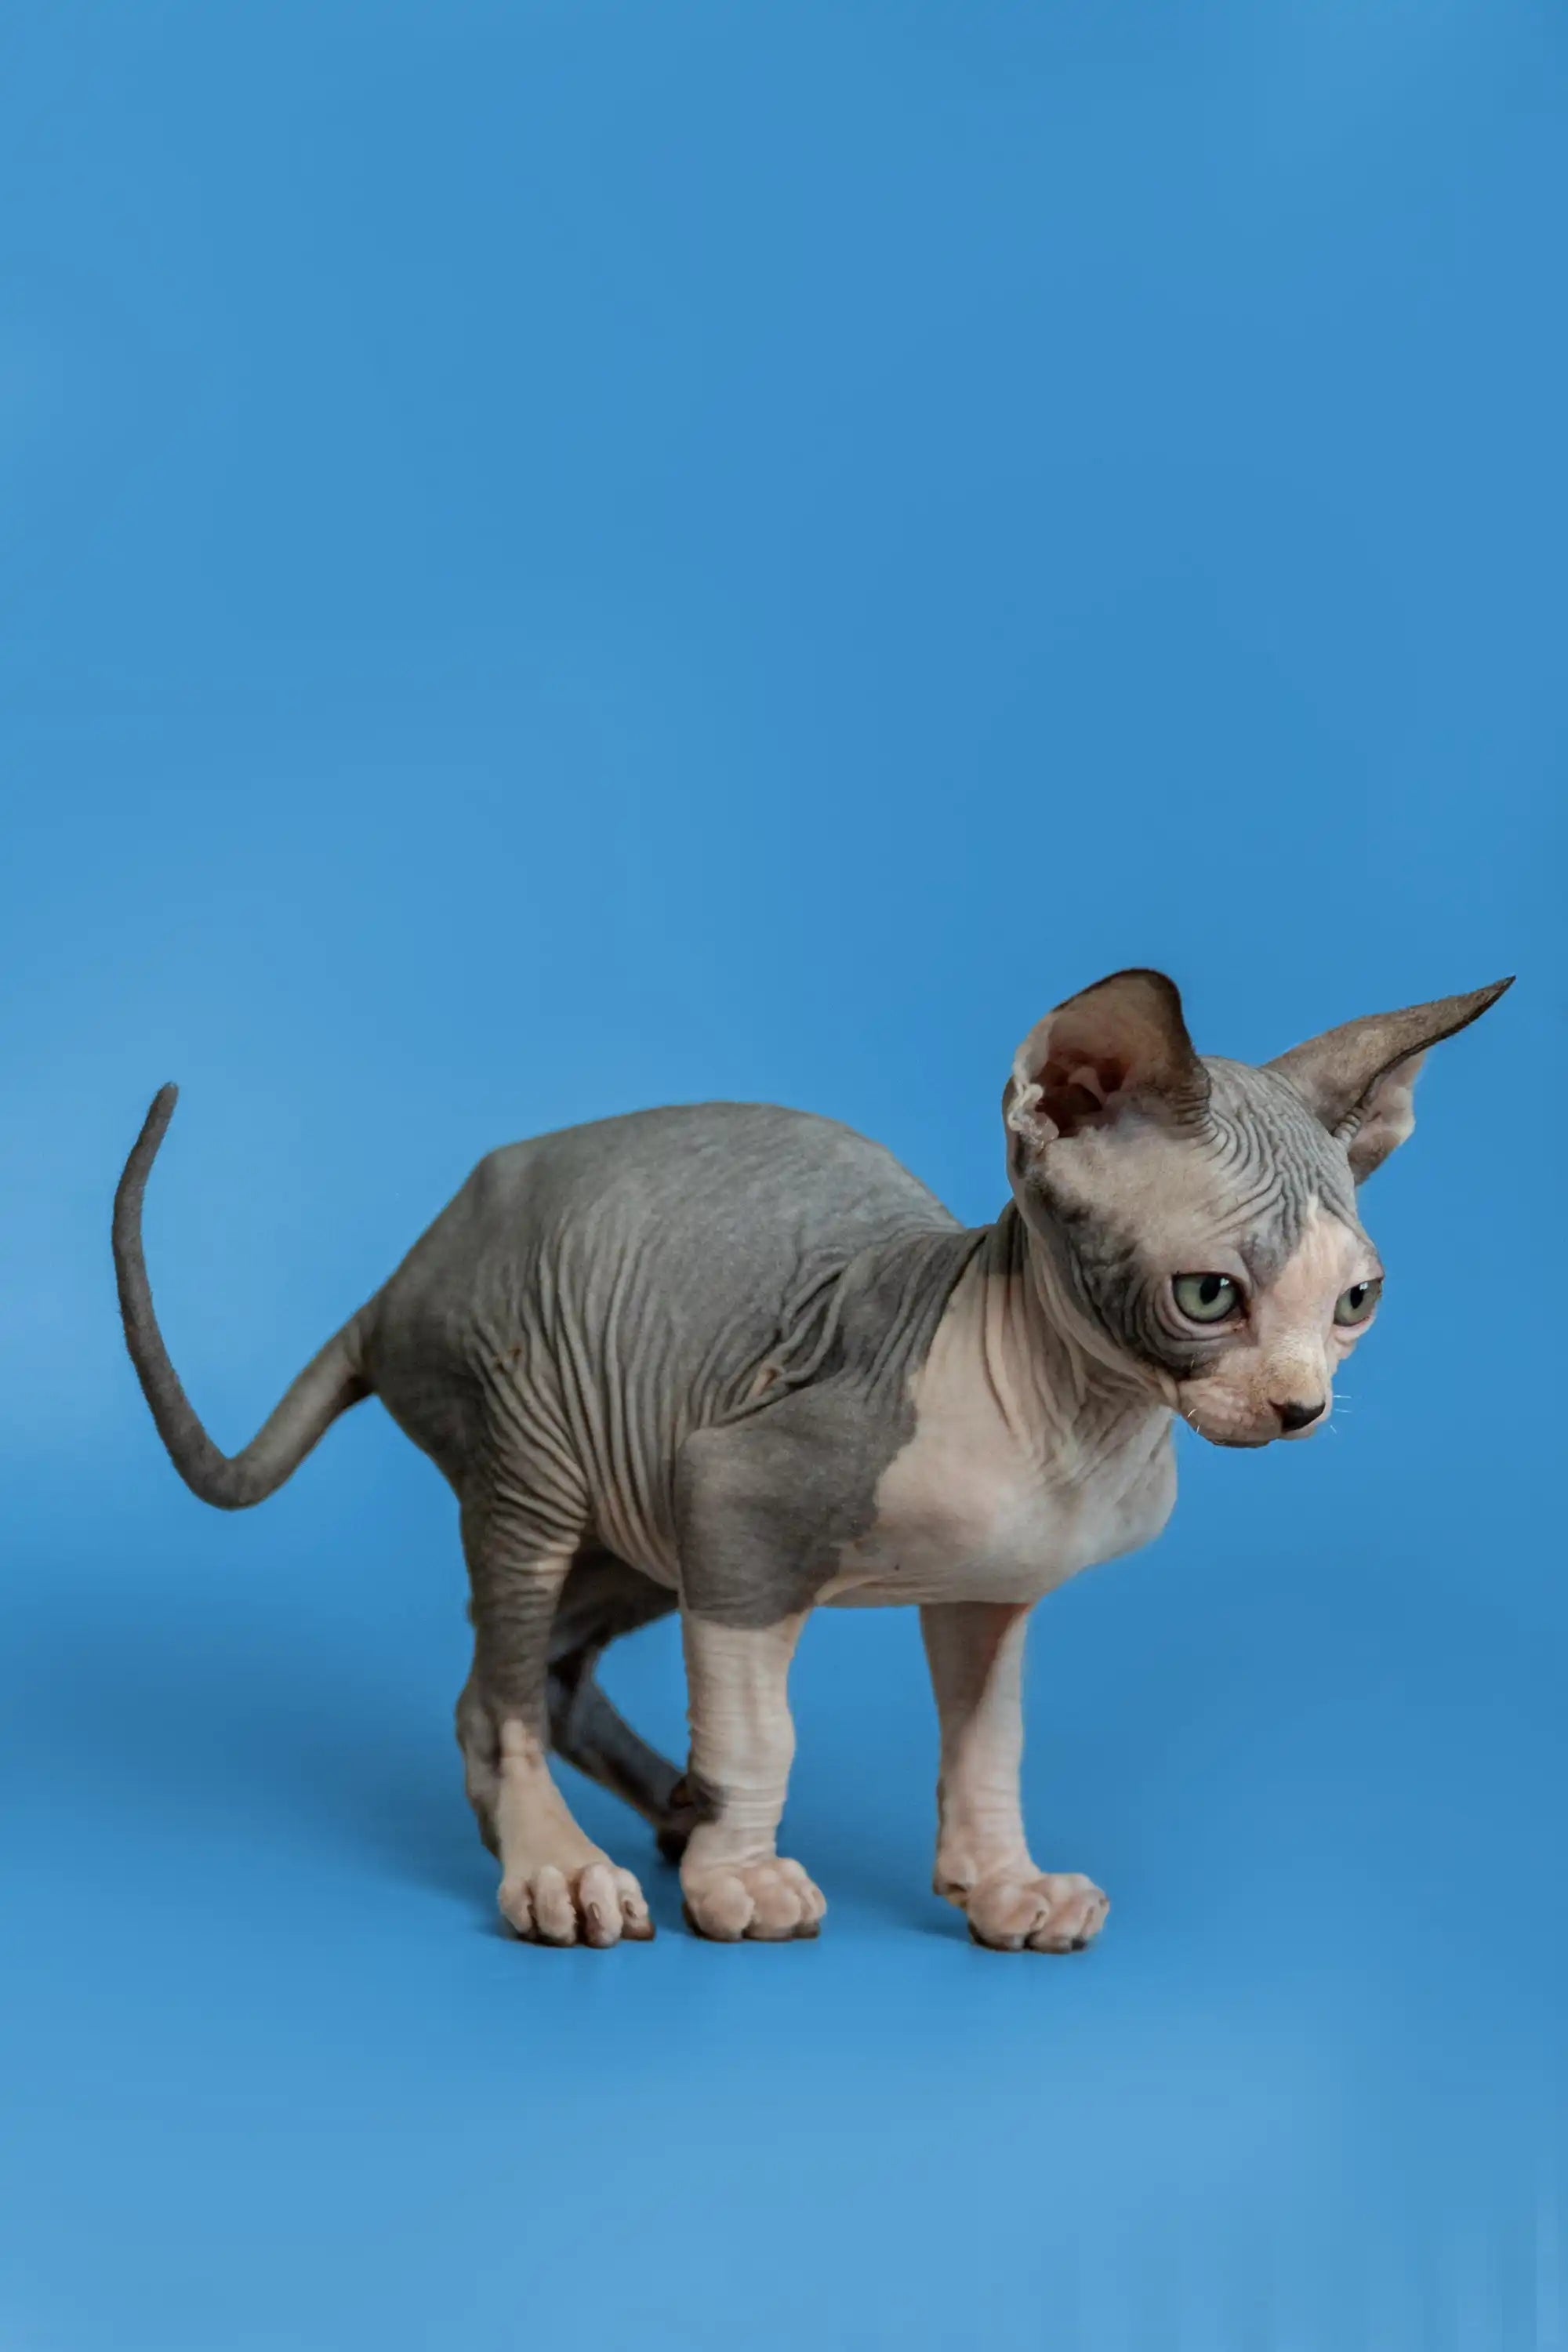 Sphynx Cats and Kittens for Sale Florian | Kitten